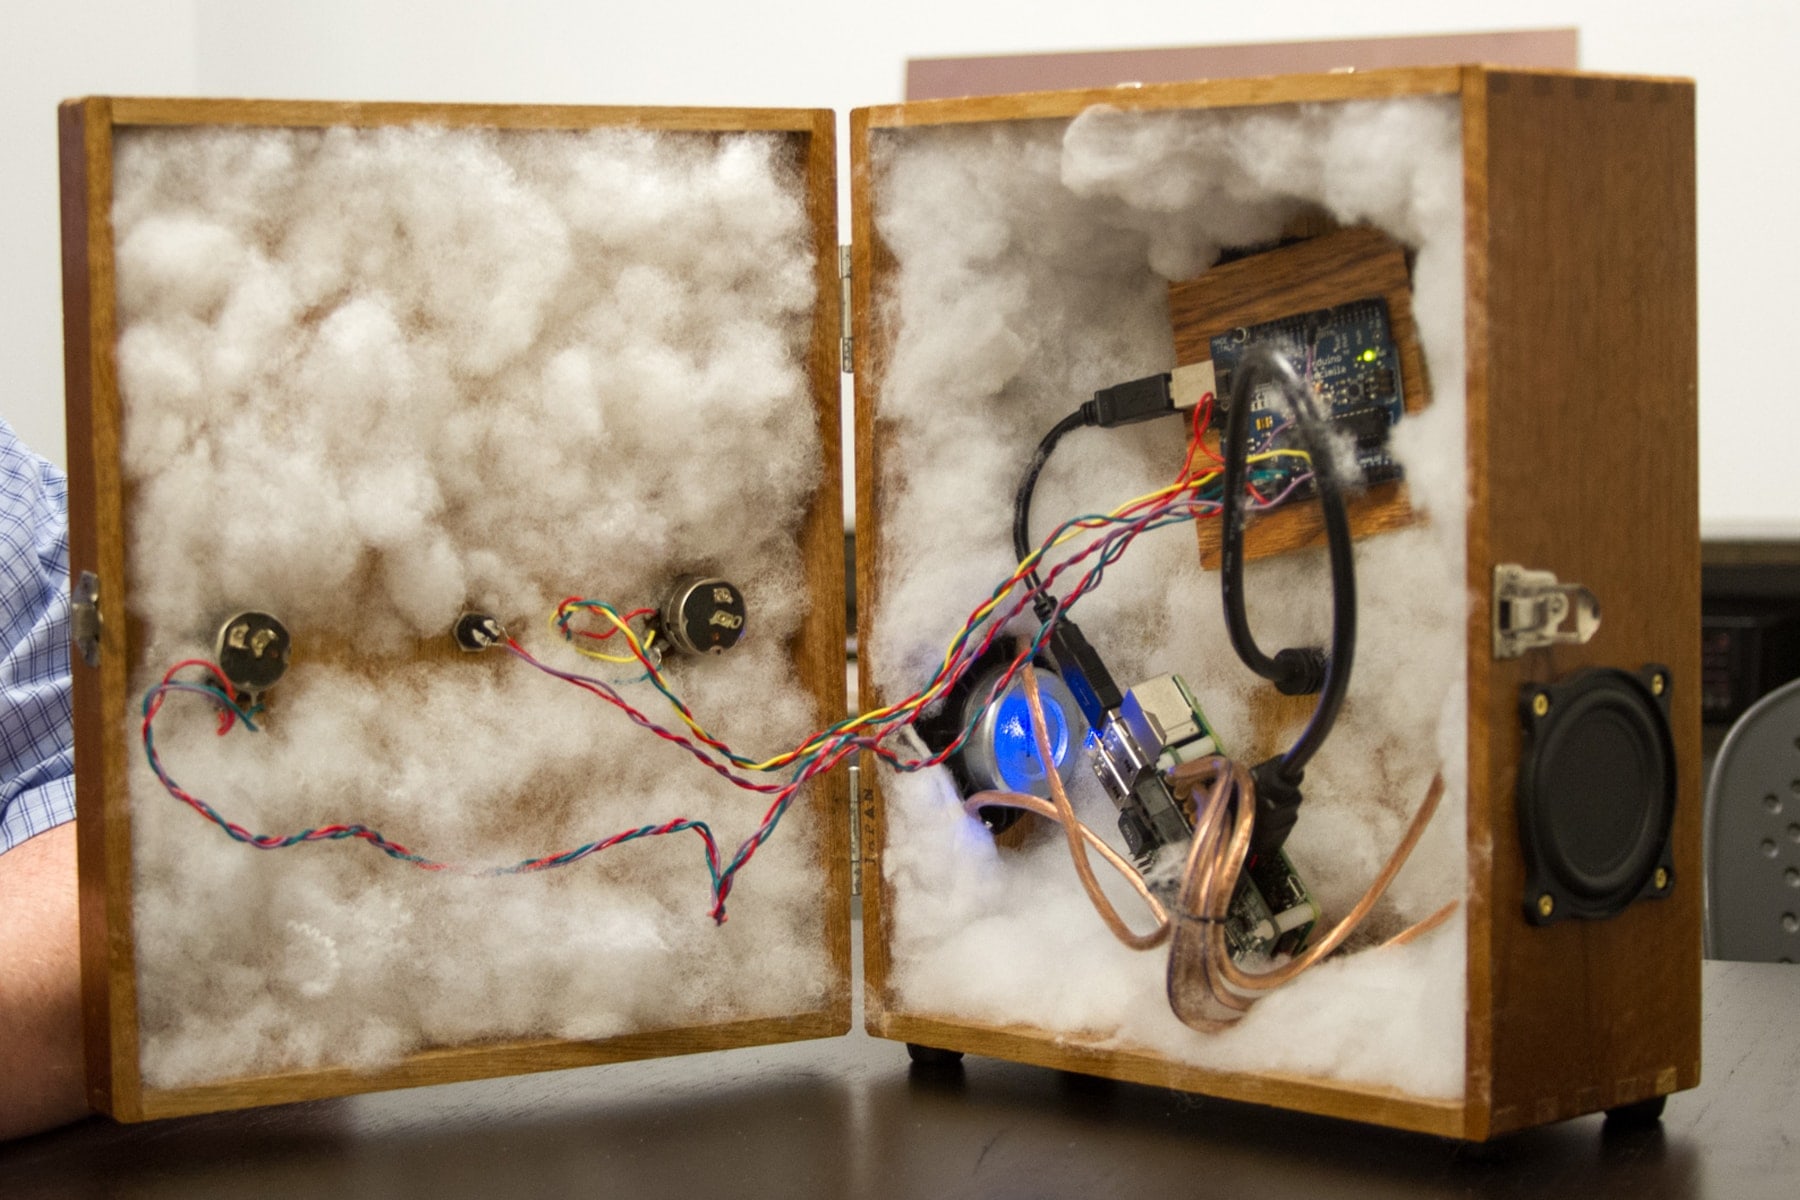 The interior of the Space Regenerator contains various hardware and wires nestled in cloud-like cotton insulation